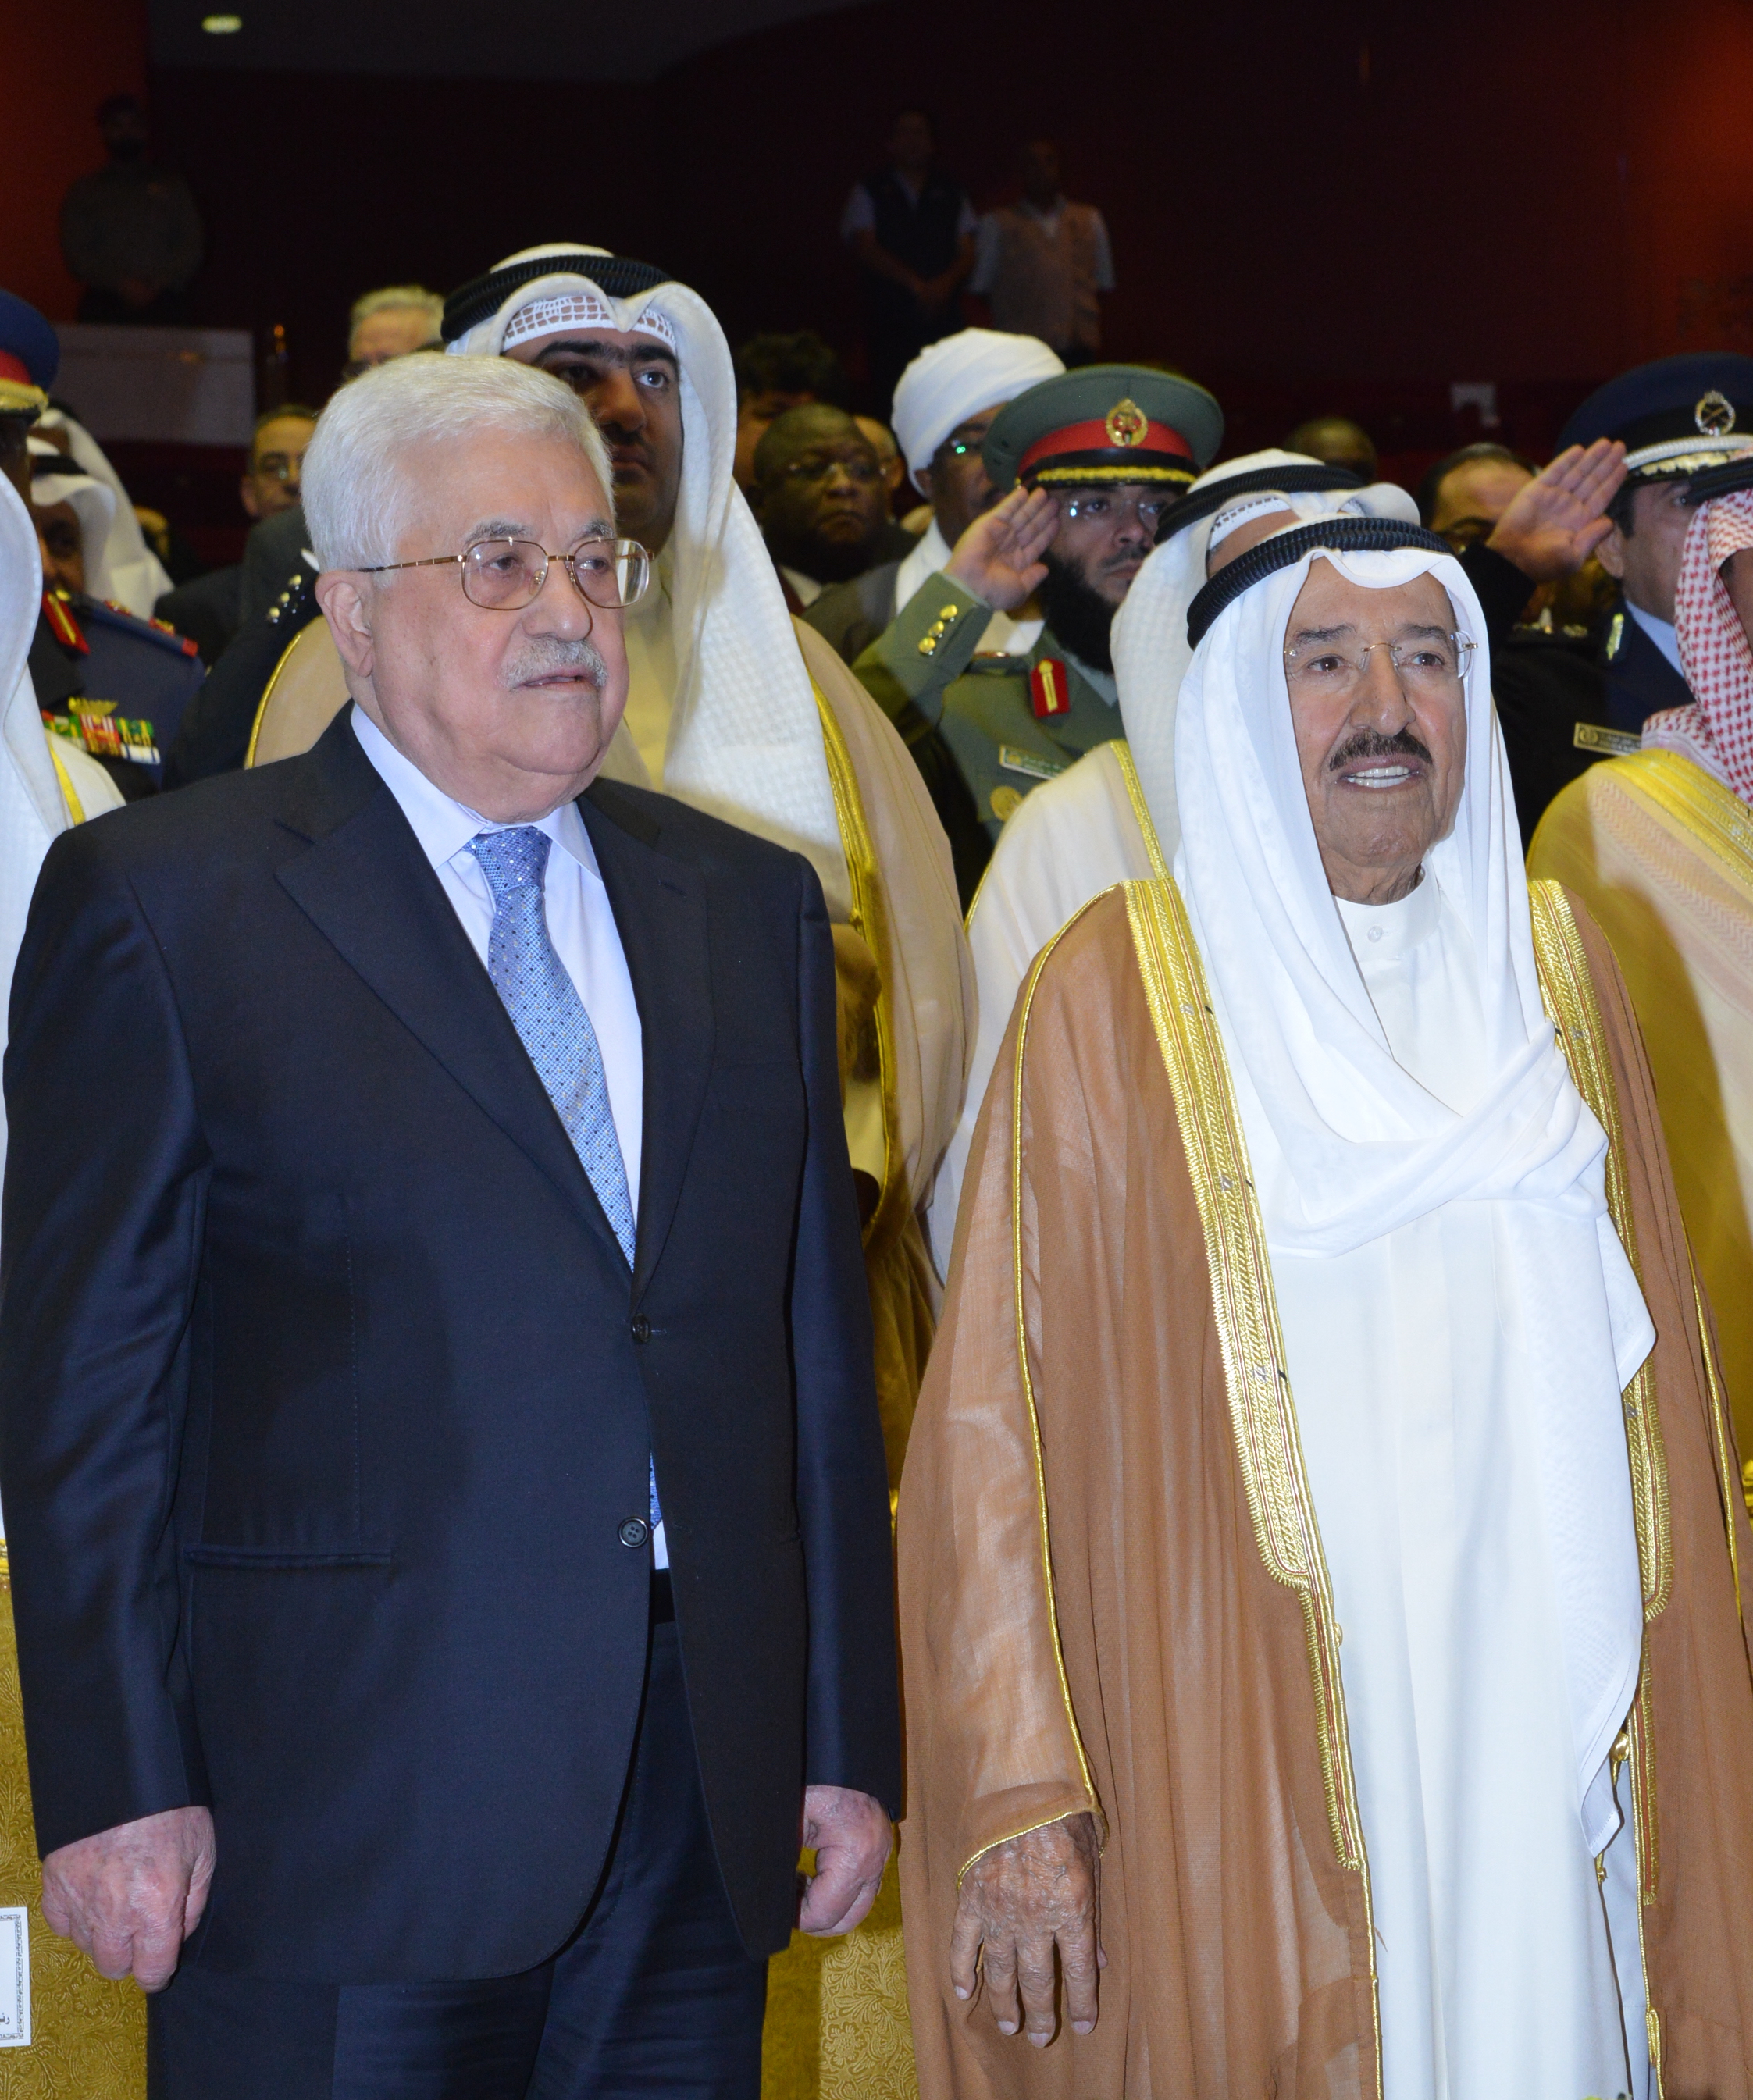 His Highness the Amir Sheikh Sabah Al-Ahmad Al-Jaber Al-Sabah and Palestinian President Mahmoud Abbas opens int'l conf. on Palestinian children's suffering